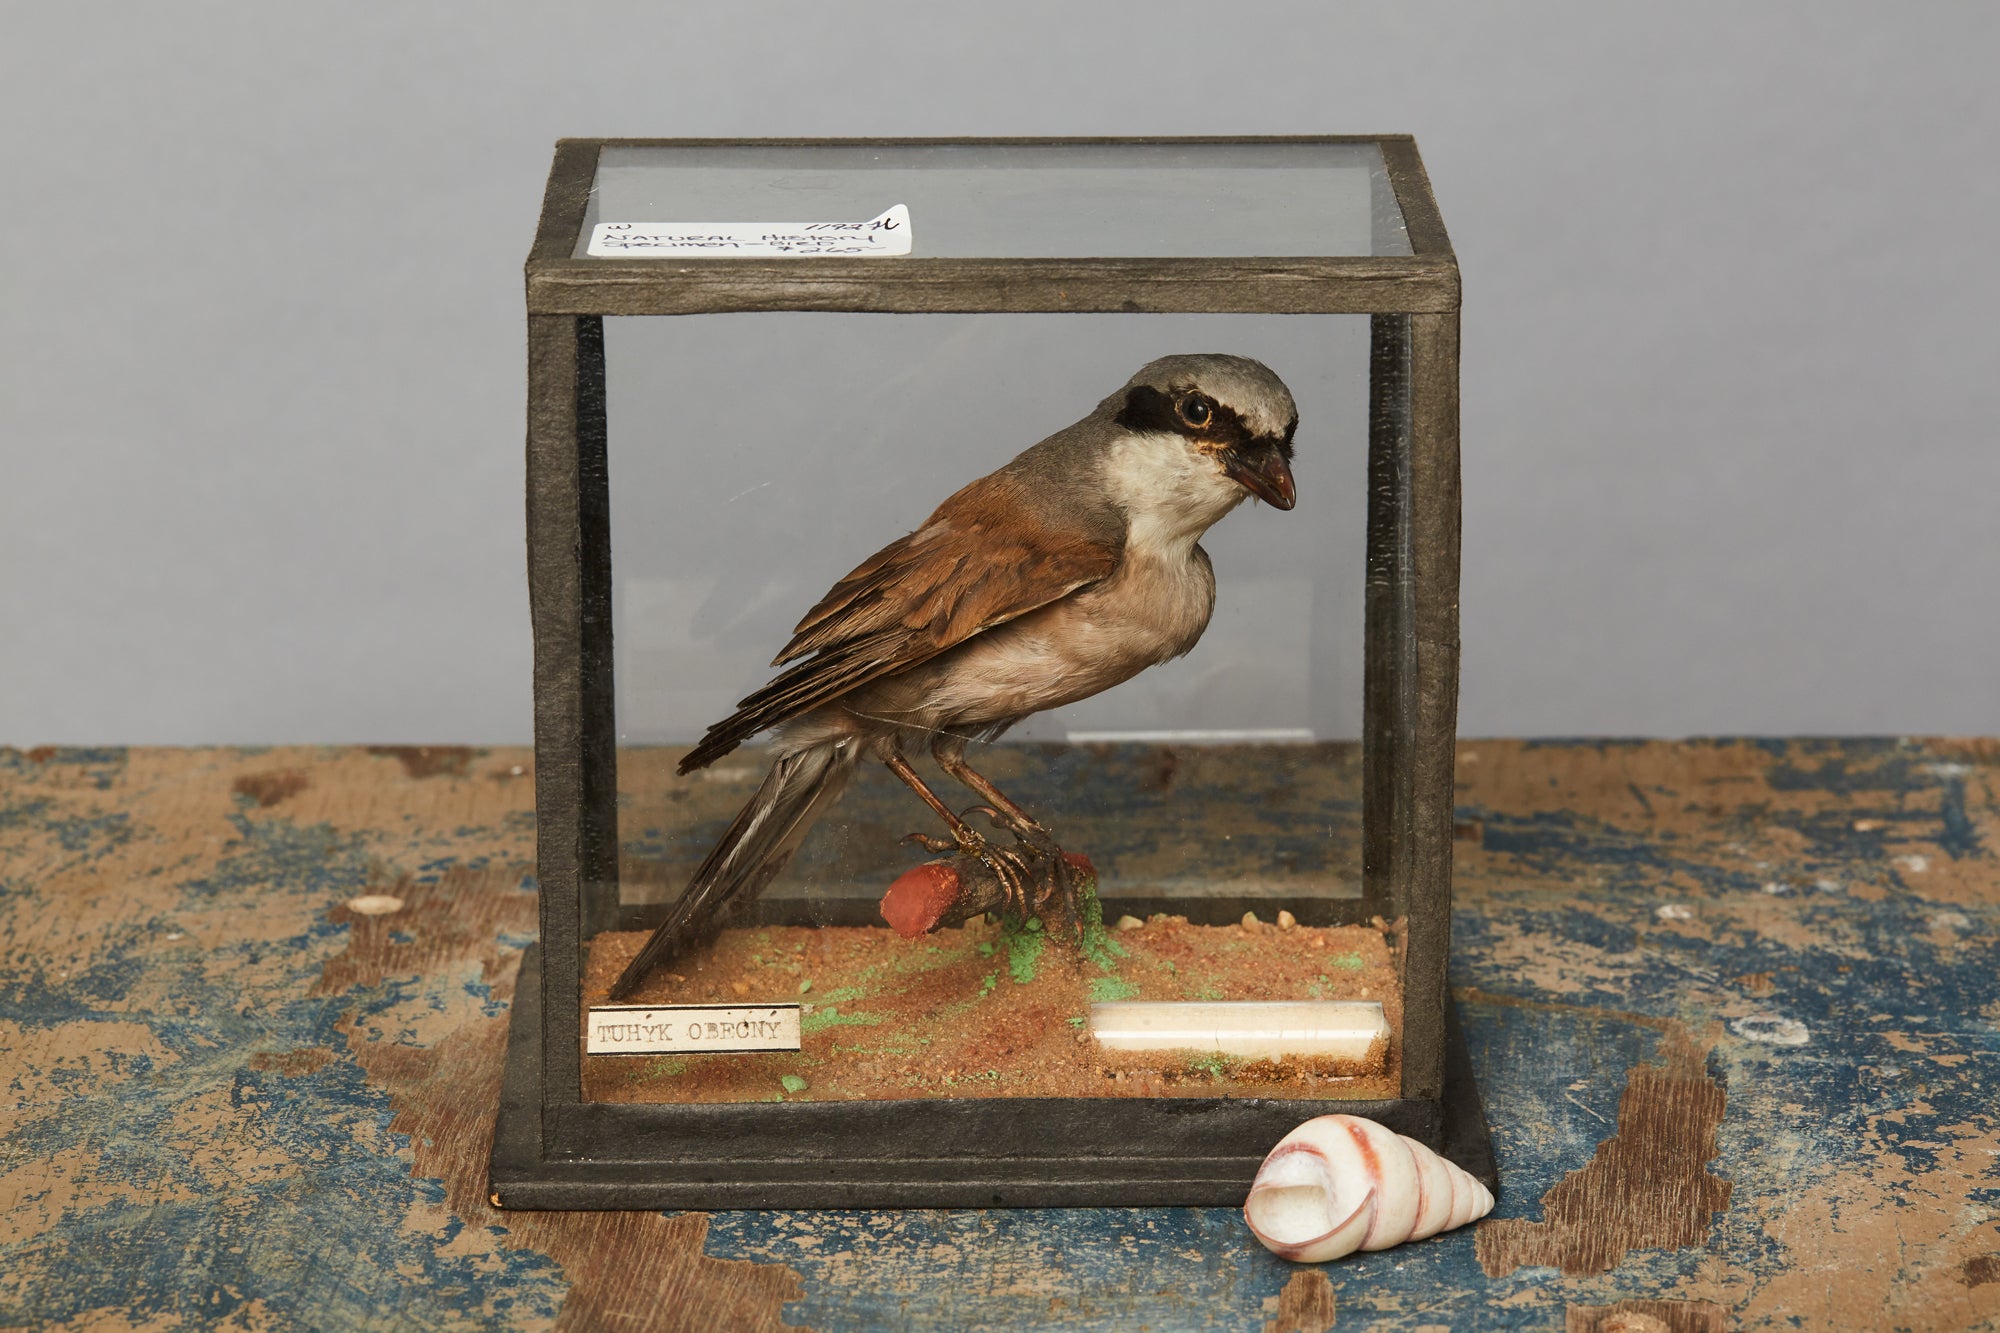 Song Bird from a Natural History Museum in Hungary